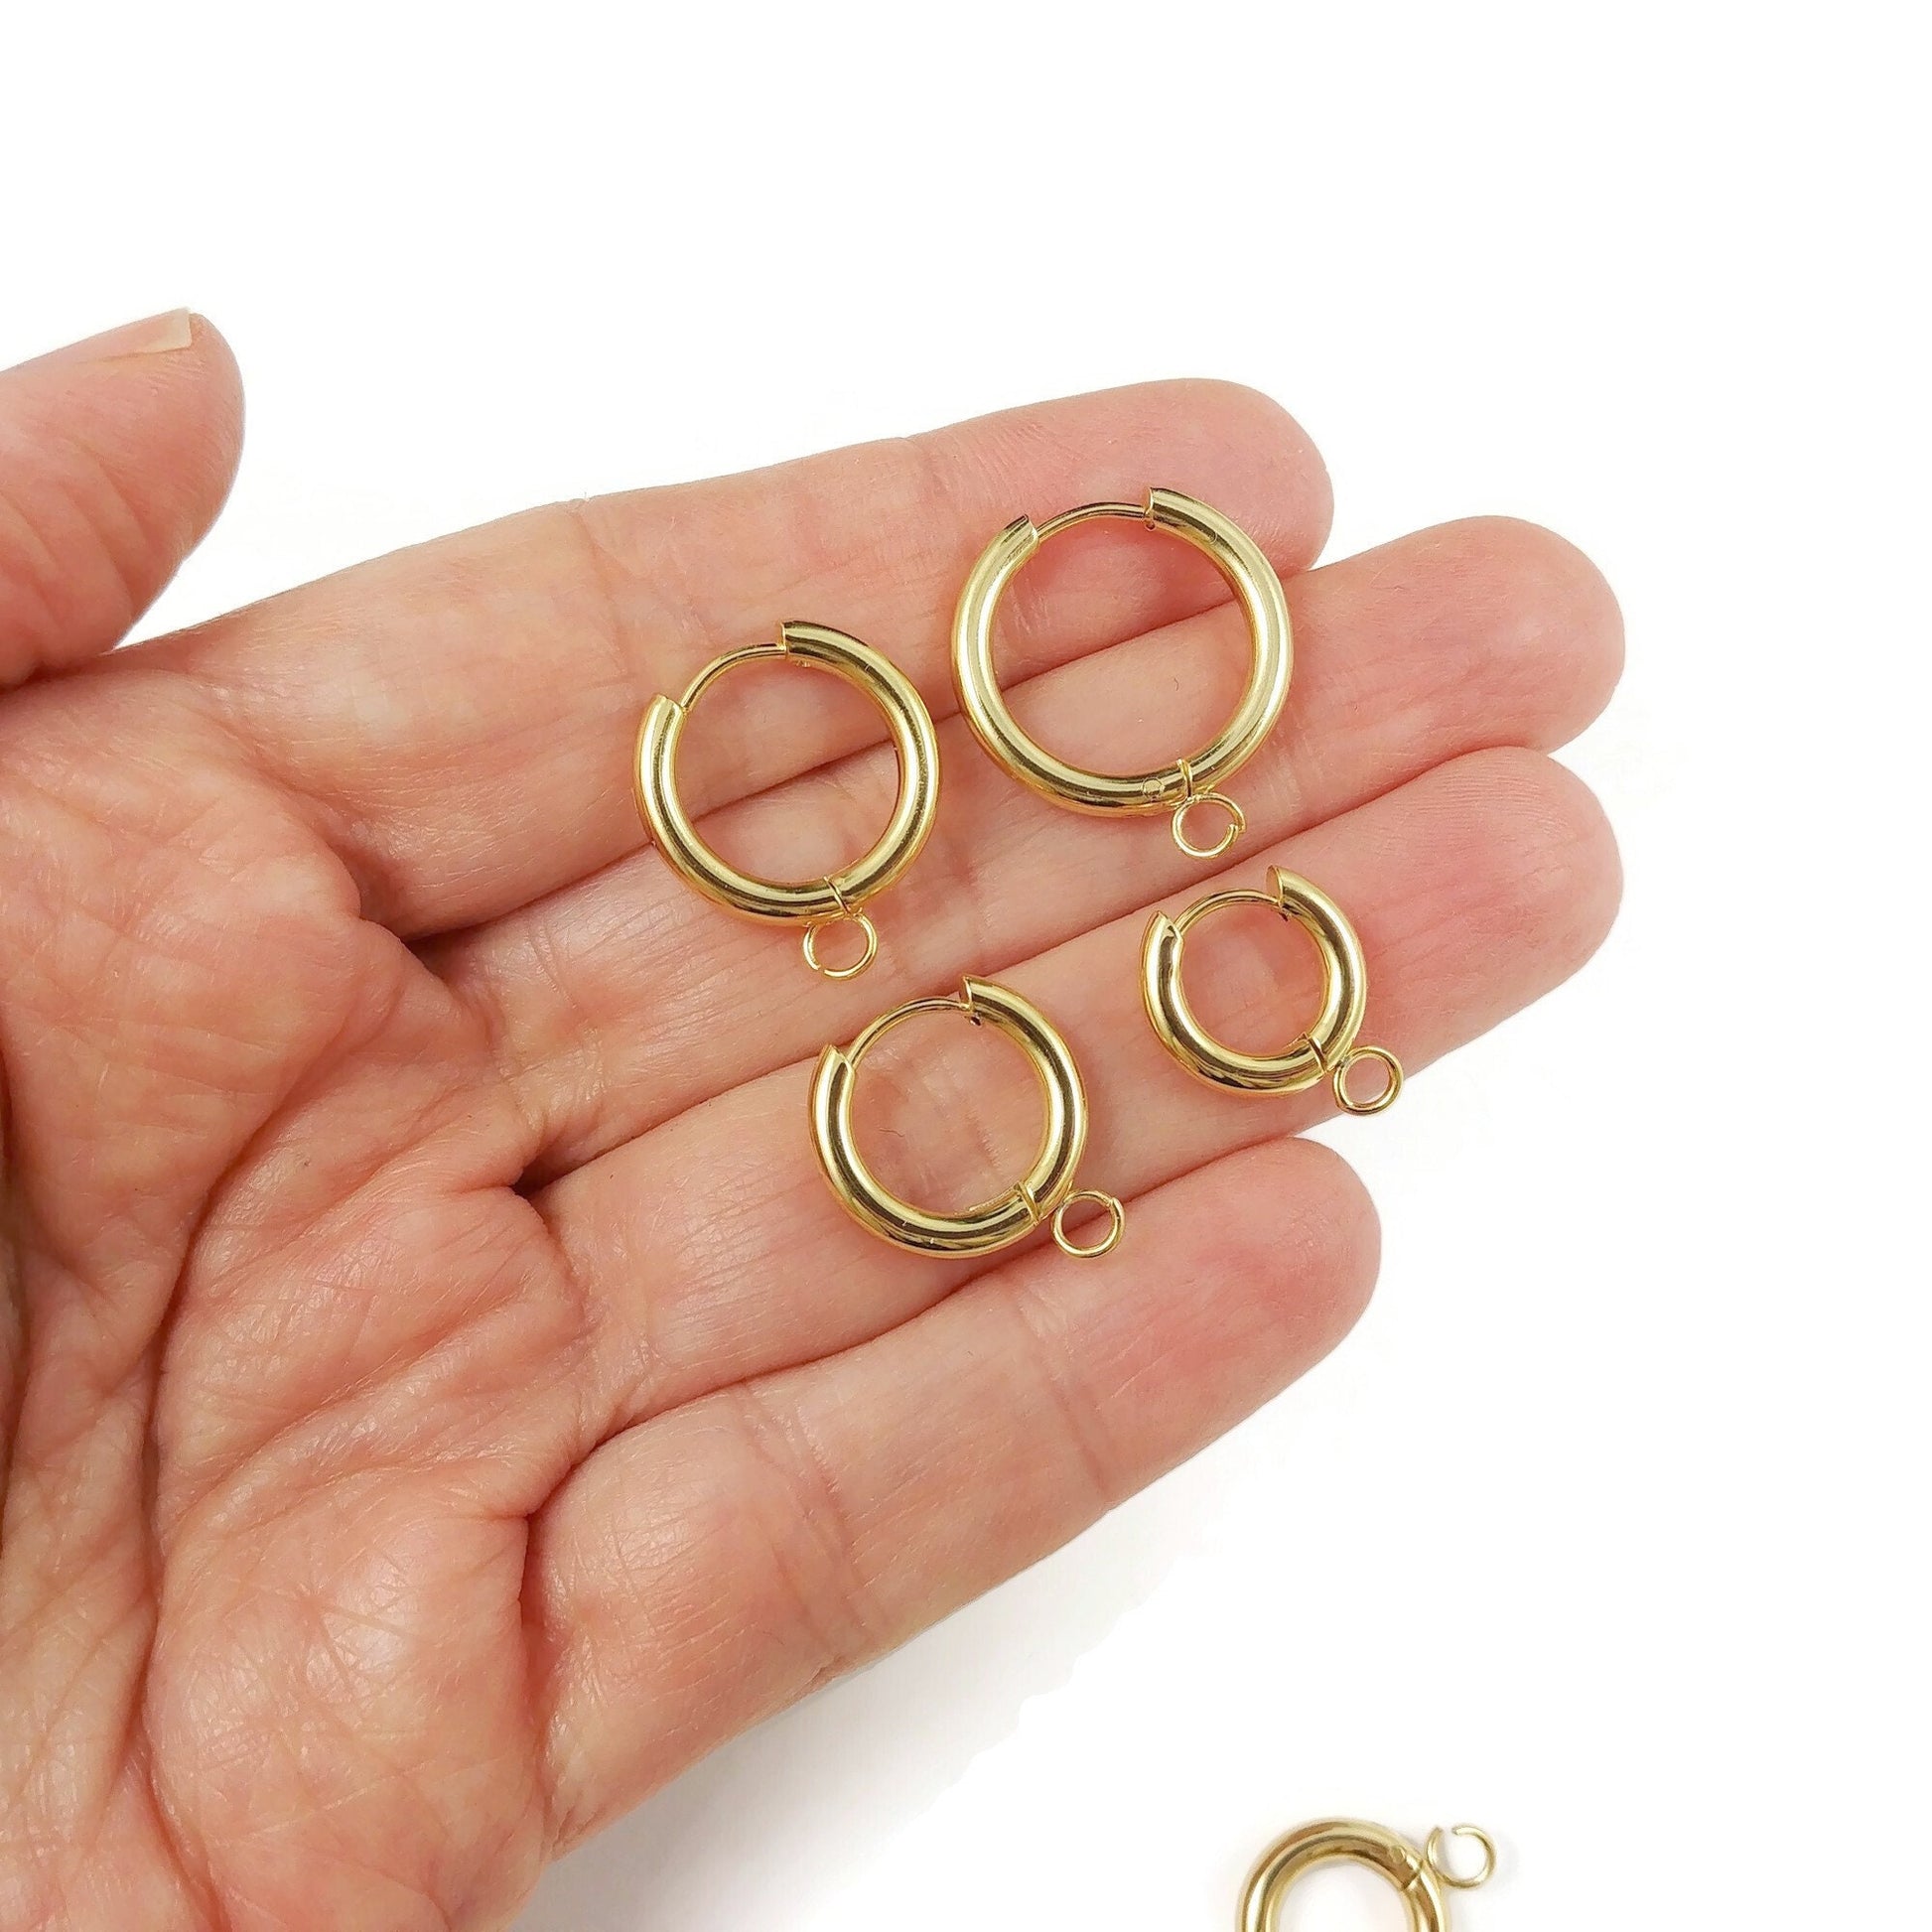 Stainless steel huggie hoops with loop, Gold, Silver, Earring findings, Small round hoops for jewelry making